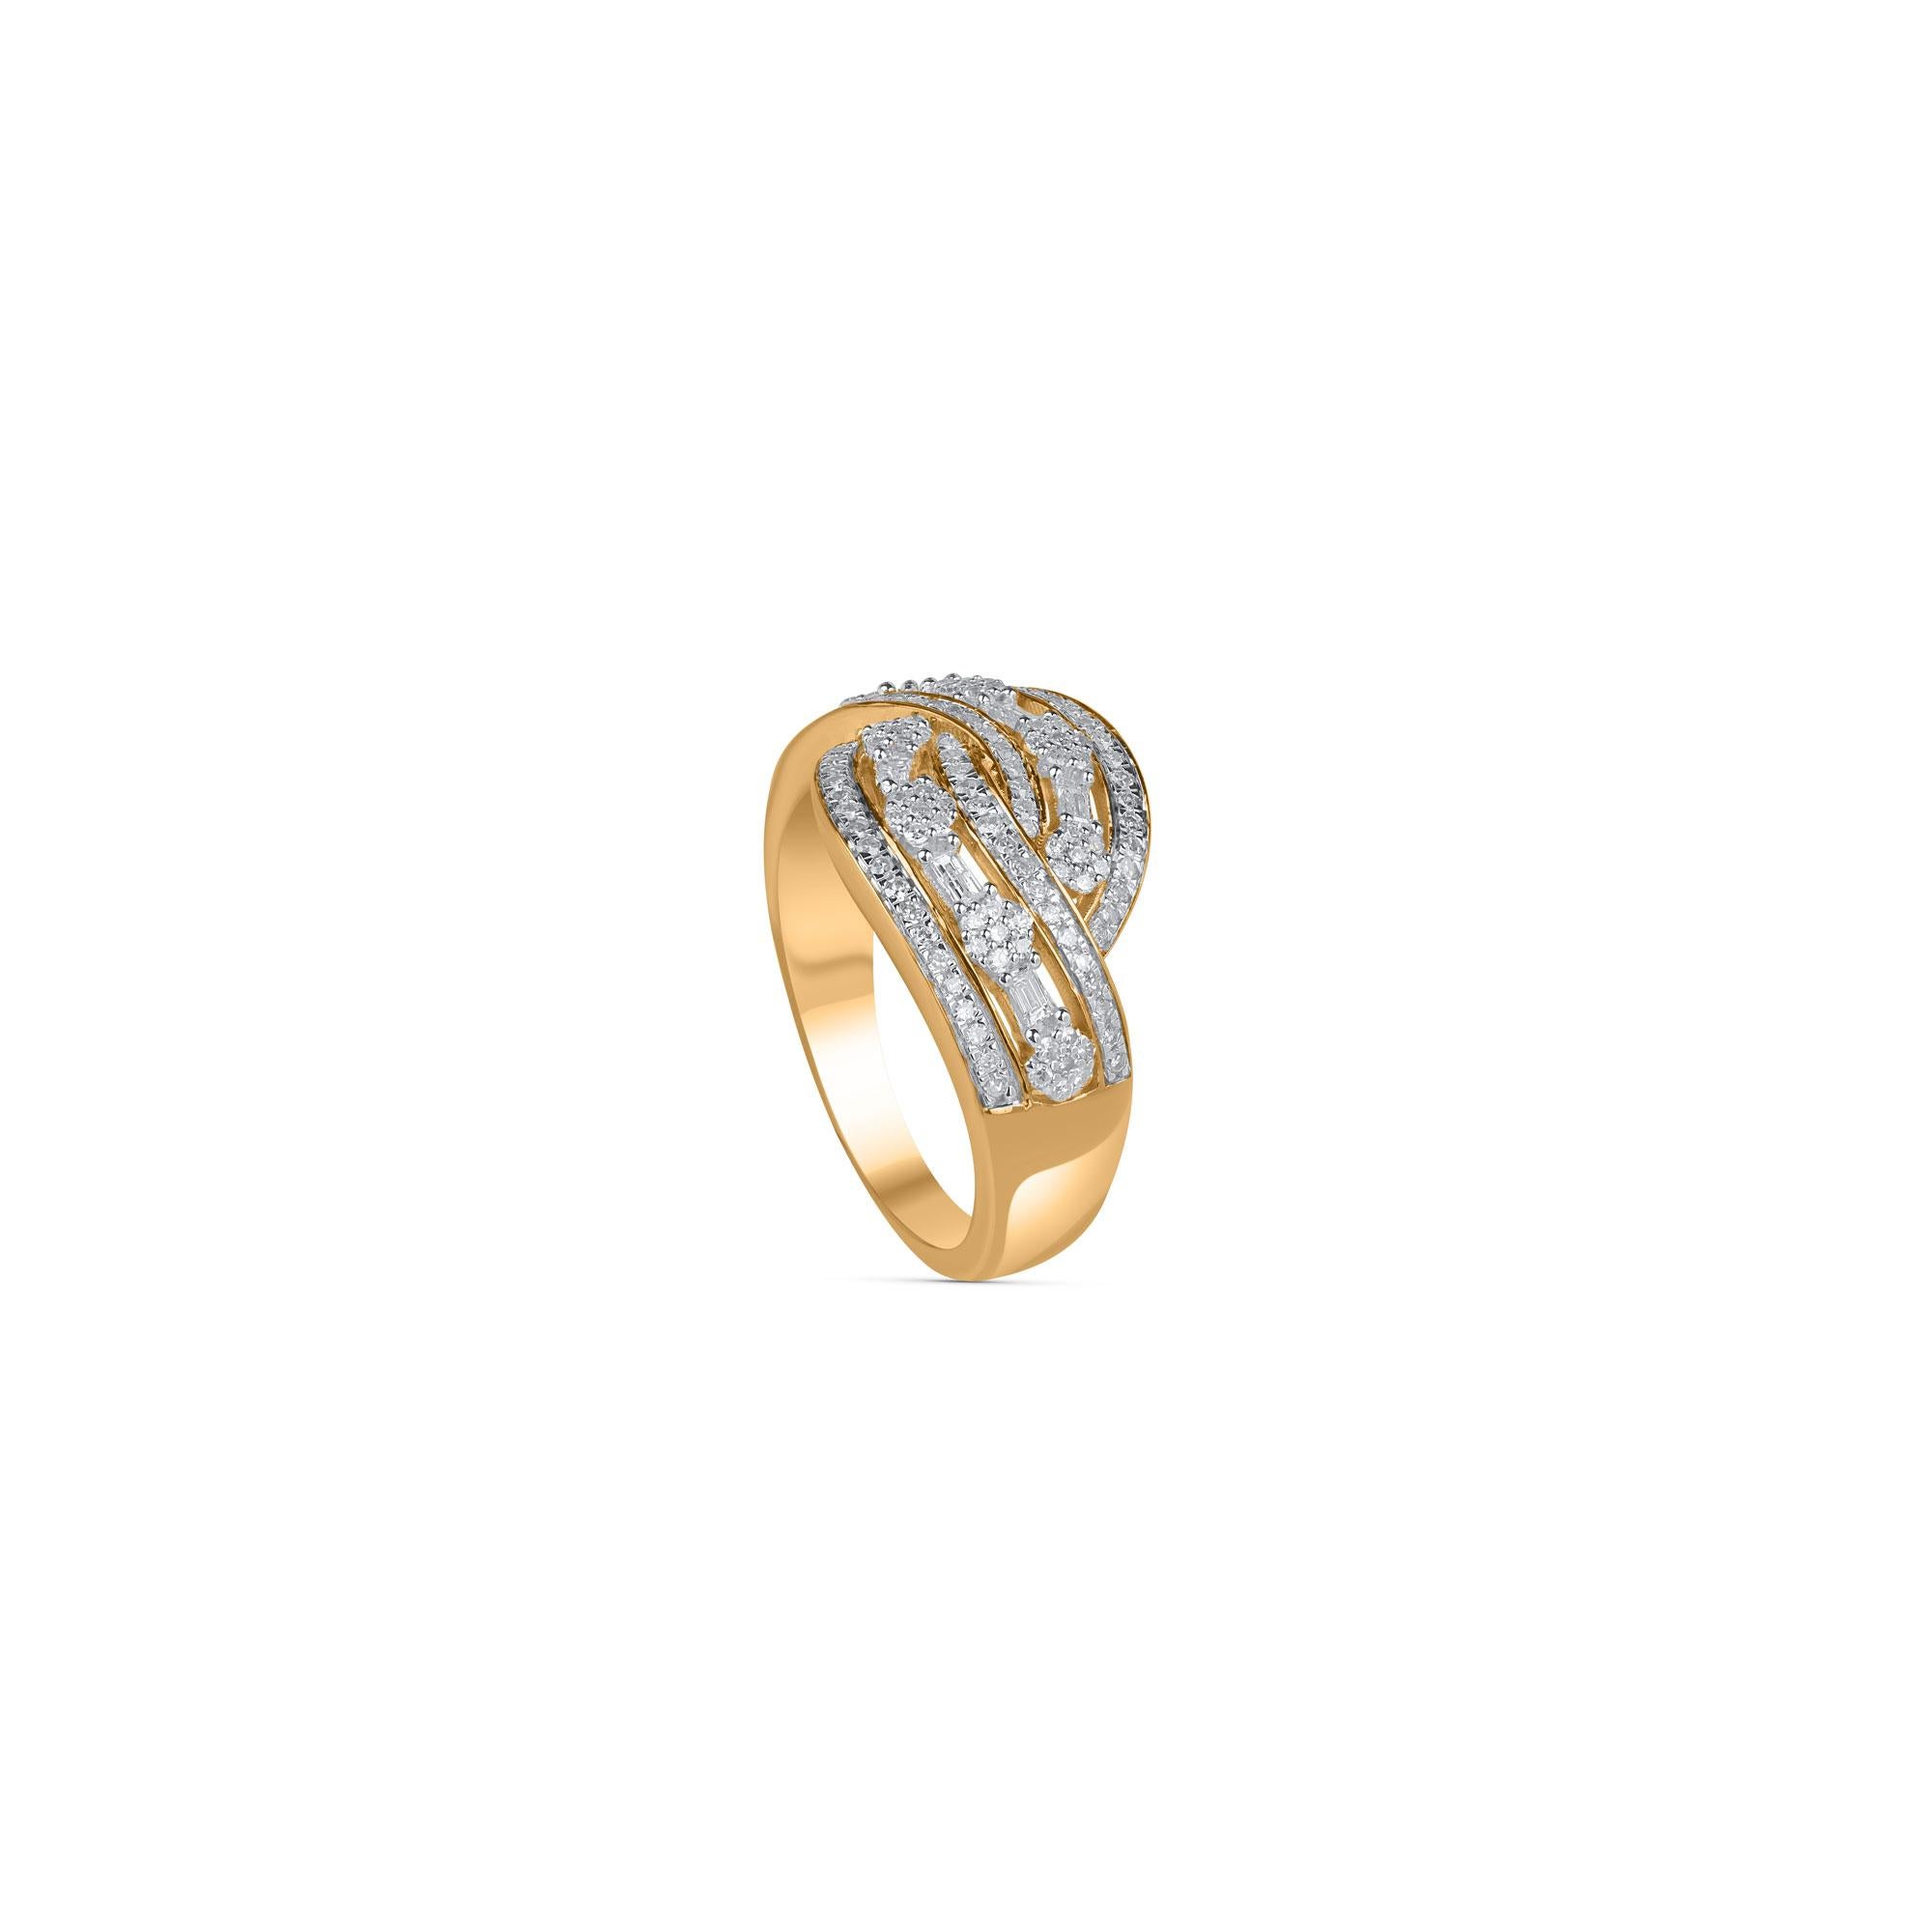 This diamond ring, made using brilliant and baguette diamonds features 127 brilliant and 6 baguette diamonds in prong setting and crafted in 10 kt yellow gold. Diamonds are graded HI color, I2 clarity.  

Metal color and ring size can be customized